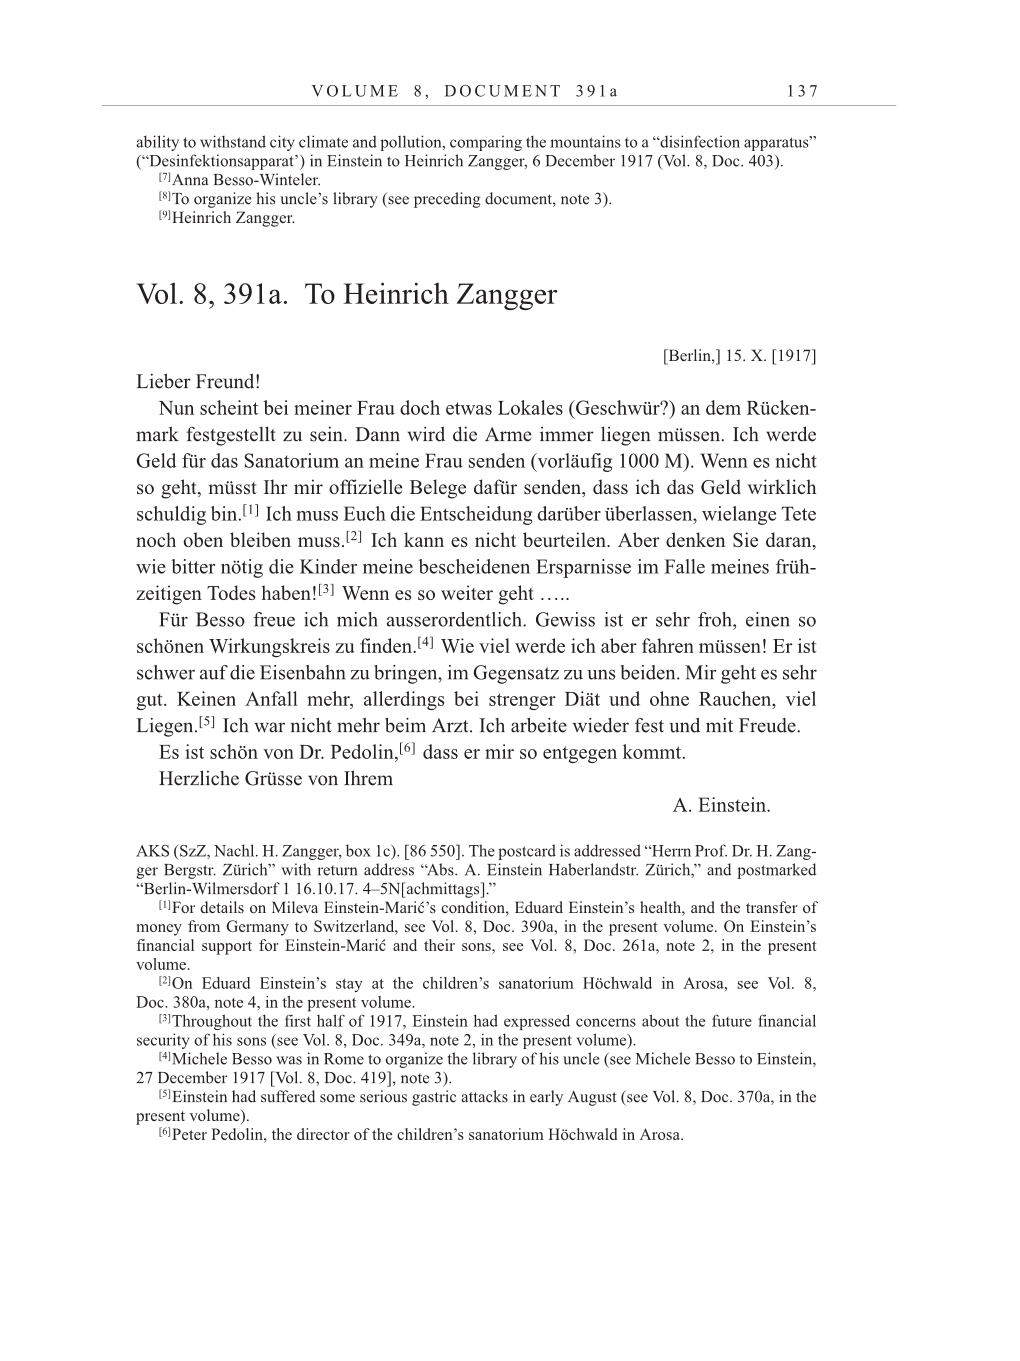 Volume 10: The Berlin Years: Correspondence May-December 1920 / Supplementary Correspondence 1909-1920 page 137